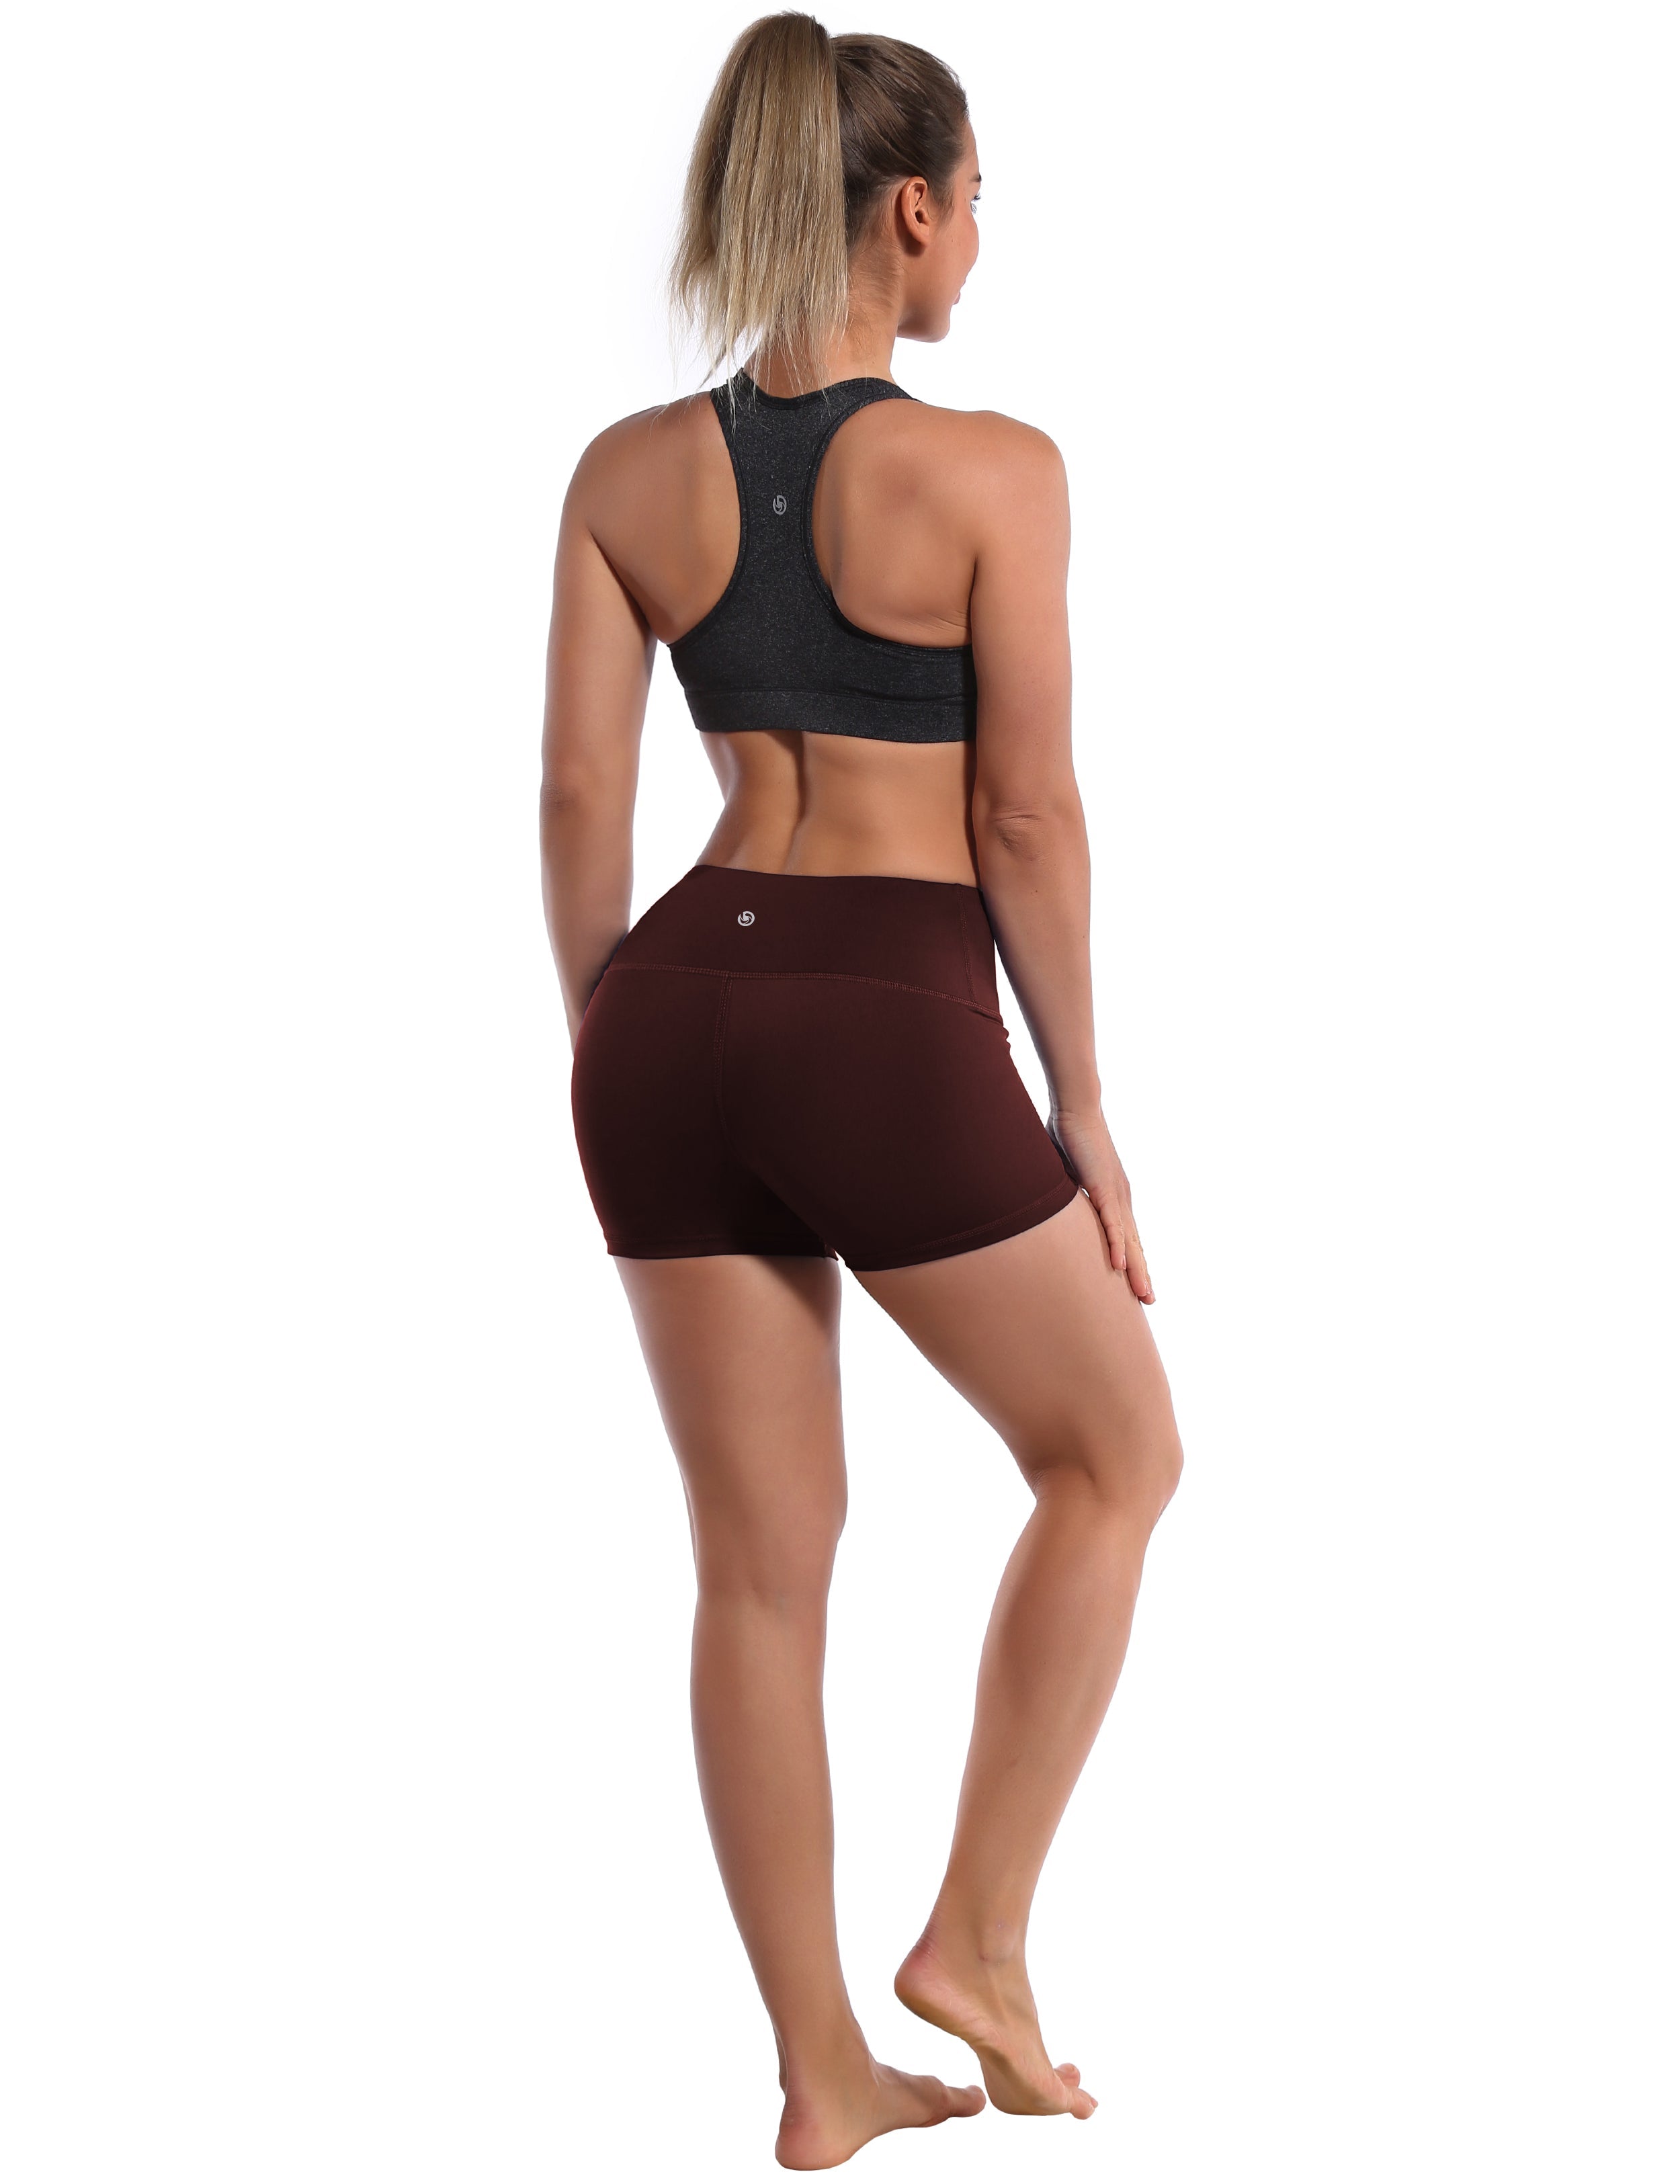 2.5" Jogging Shorts mahoganymaroon Softest-ever fabric High elasticity High density 4-way stretch Fabric doesn't attract lint easily No see-through Moisture-wicking Machine wash 75% Nylon, 25% Spandex